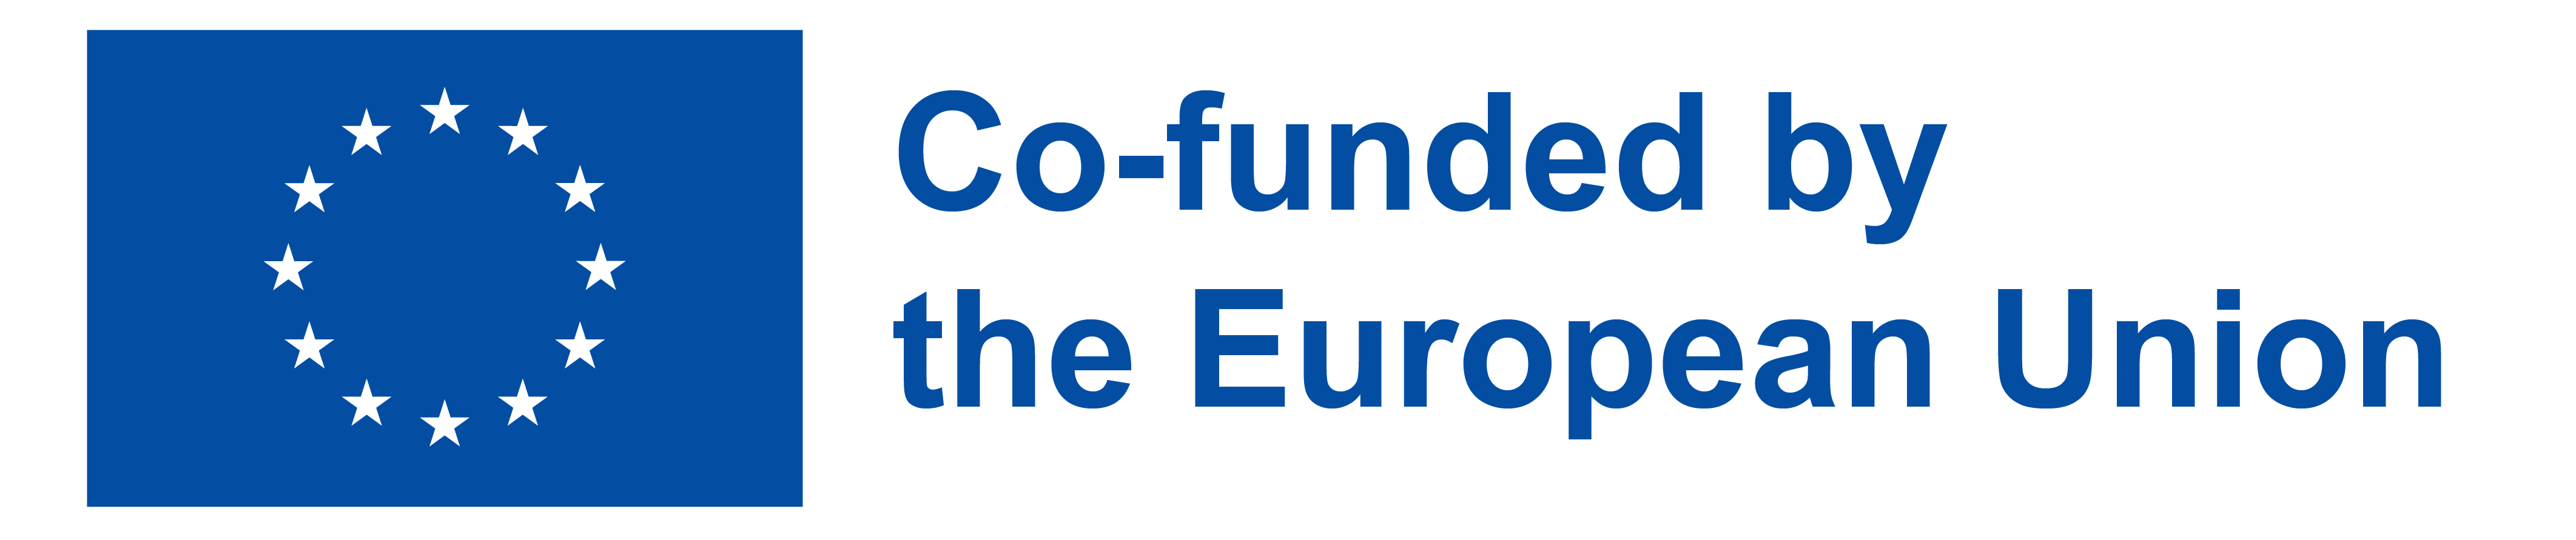 Co-fundend by the Erasmus+ Programme of the European Union